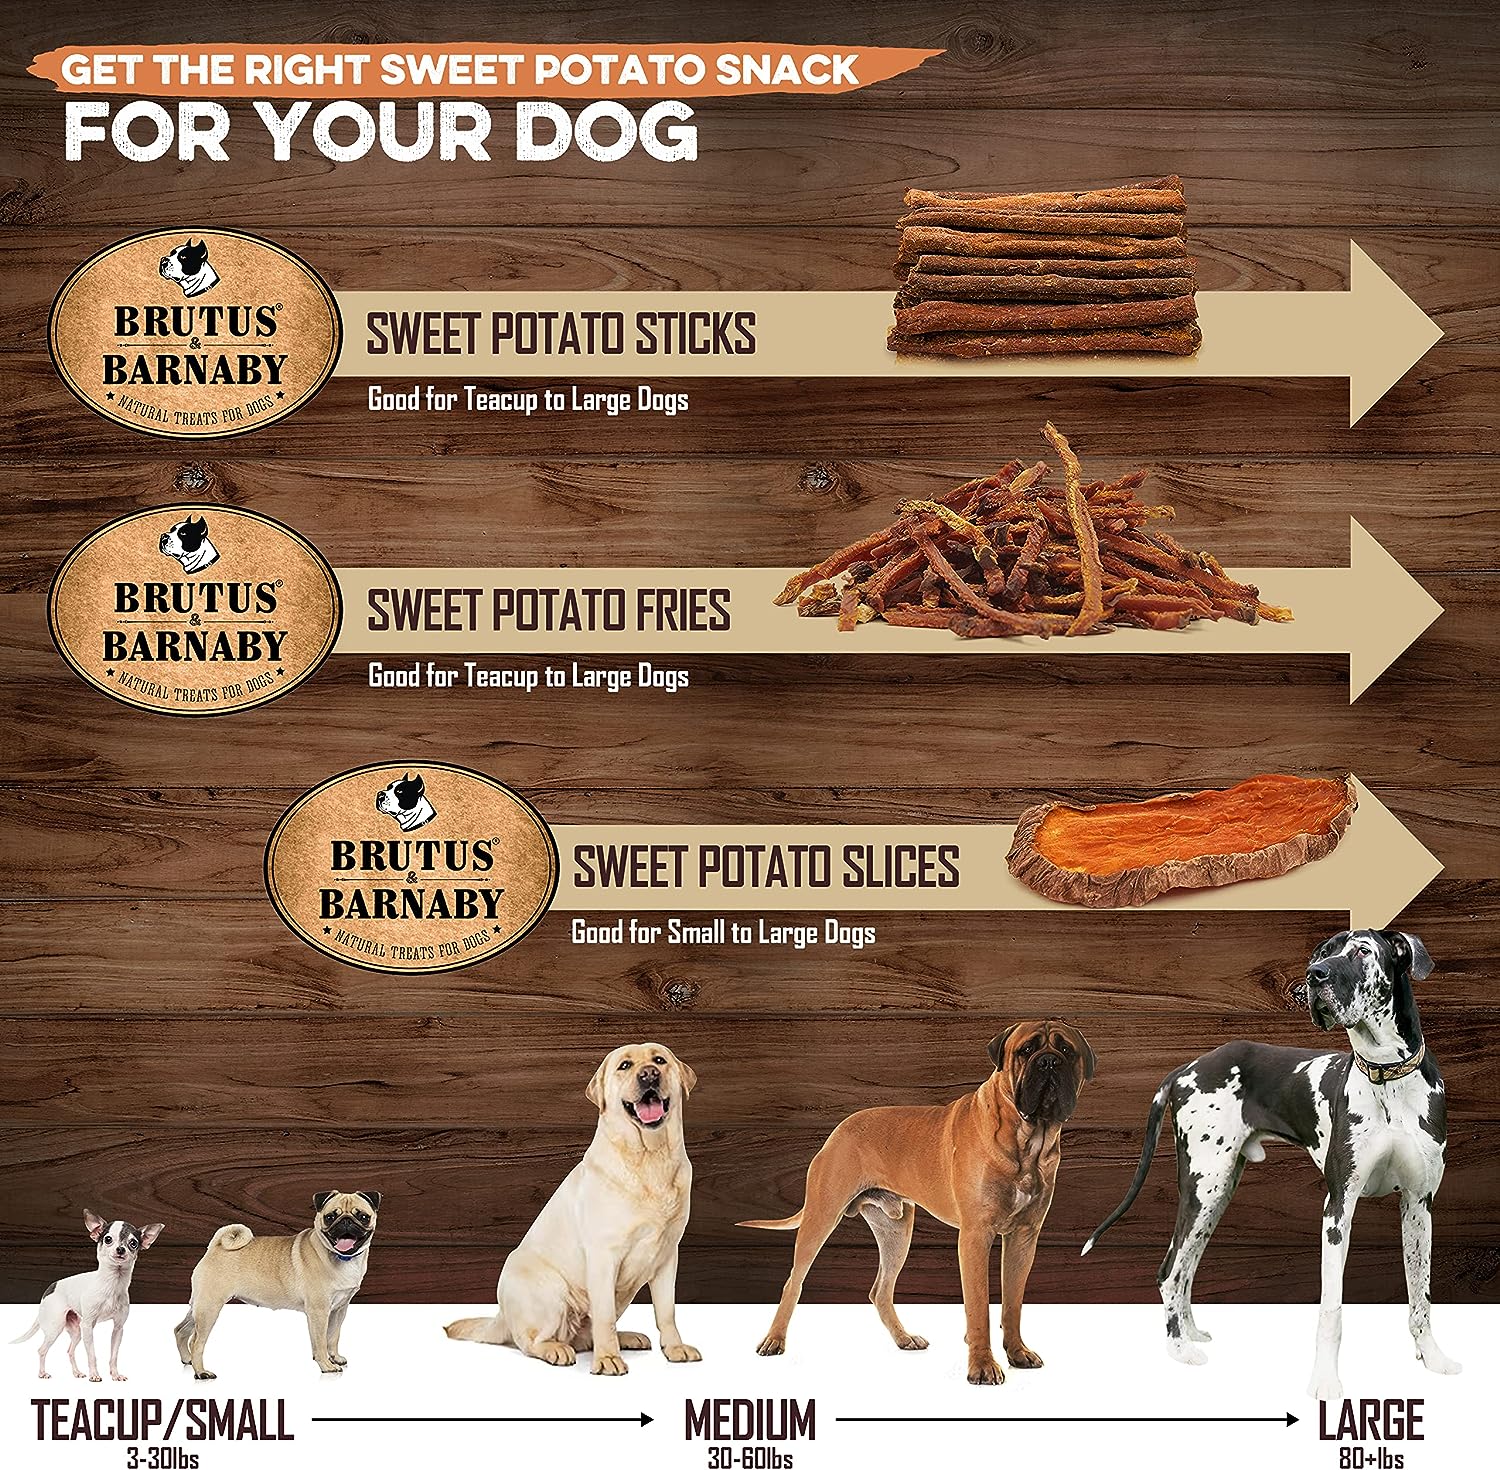 BRUTUS & BARNABY Sweet Potato Dog Treats- No Additive Dehydrated Sweet Potato Fries, Grain Free, Gluten Free and No Preservatives Added (2lb) : Pet Supplies